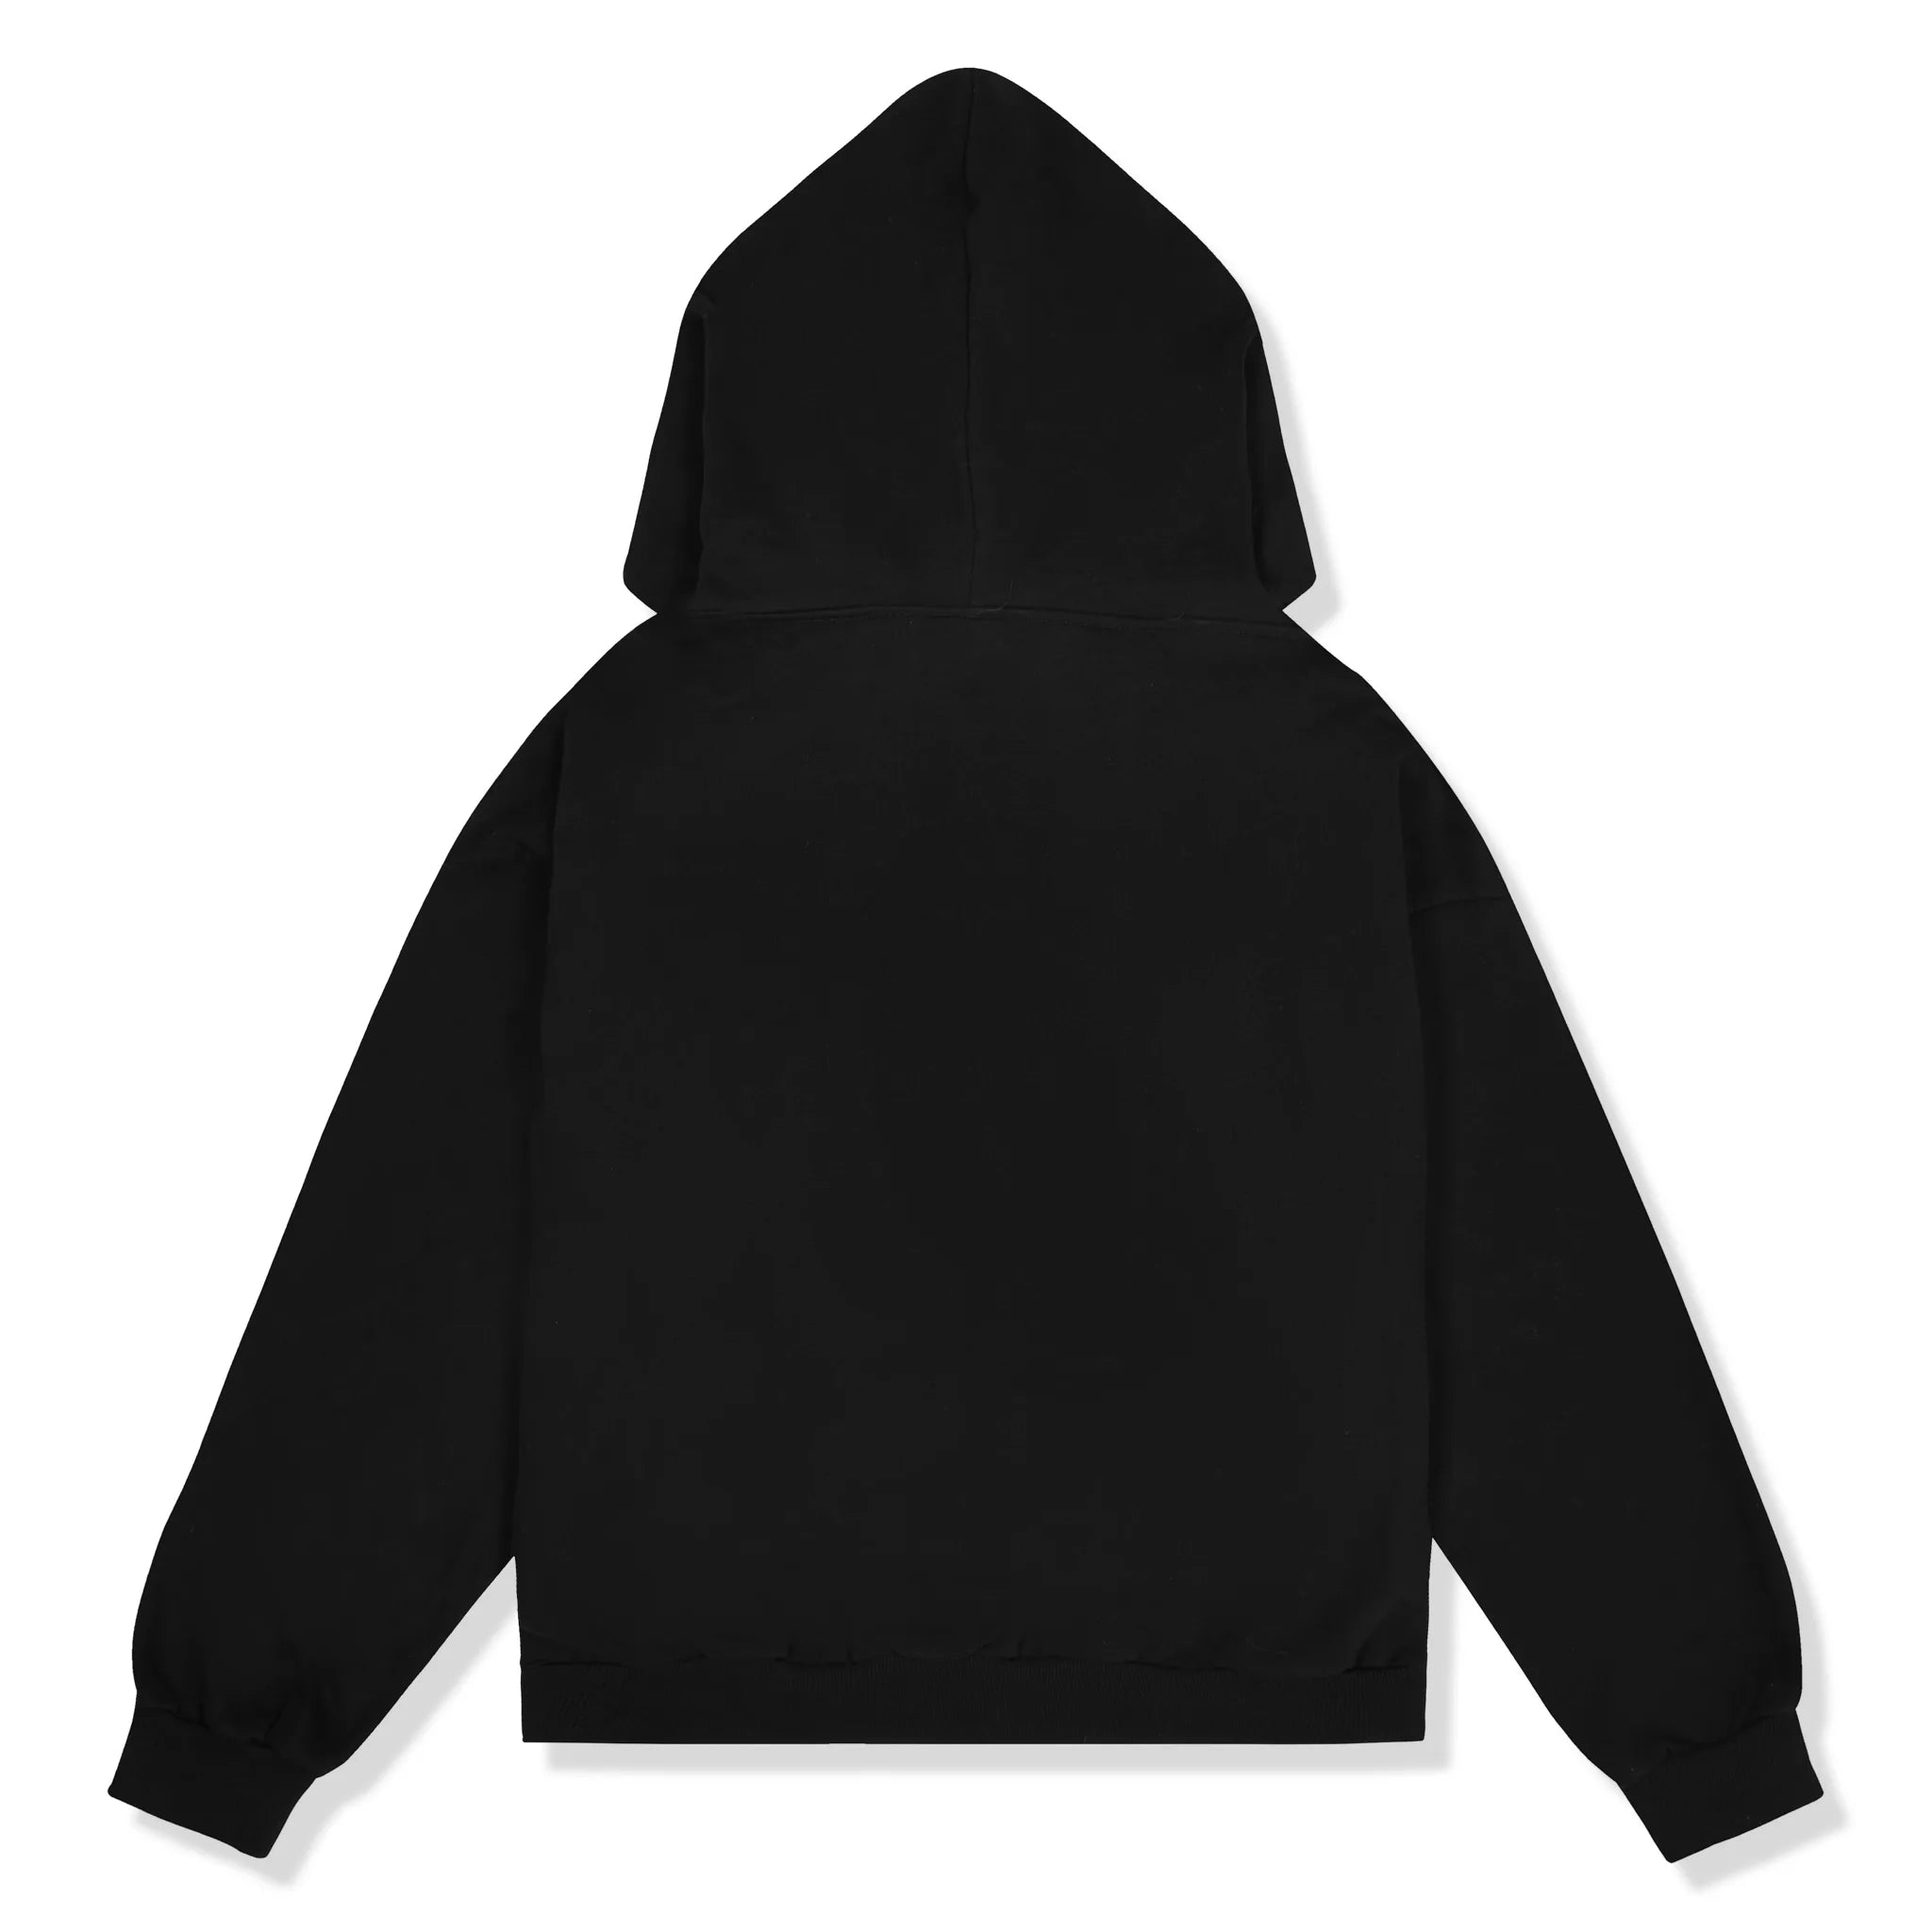 Back view of Carsicko DMT Black Hoodie